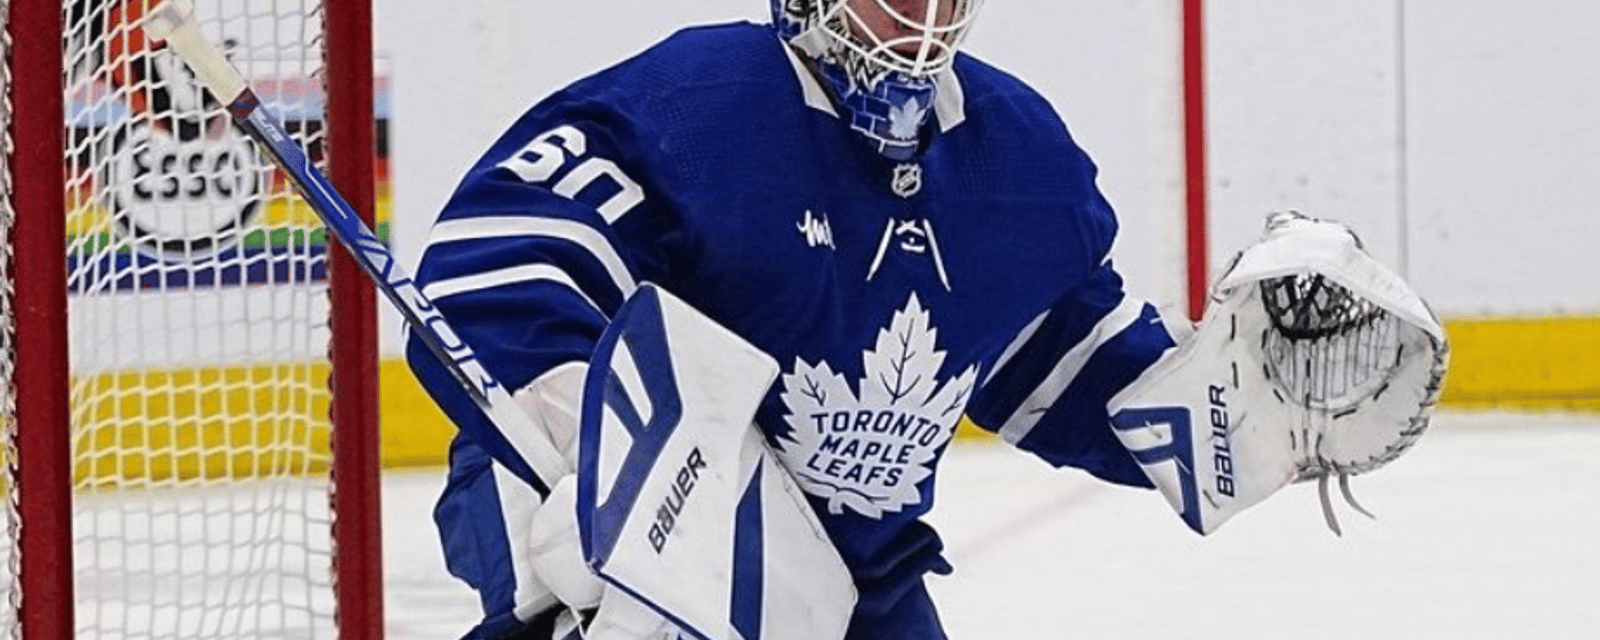 Pair of Leafs goalies release brand new mask artwork 